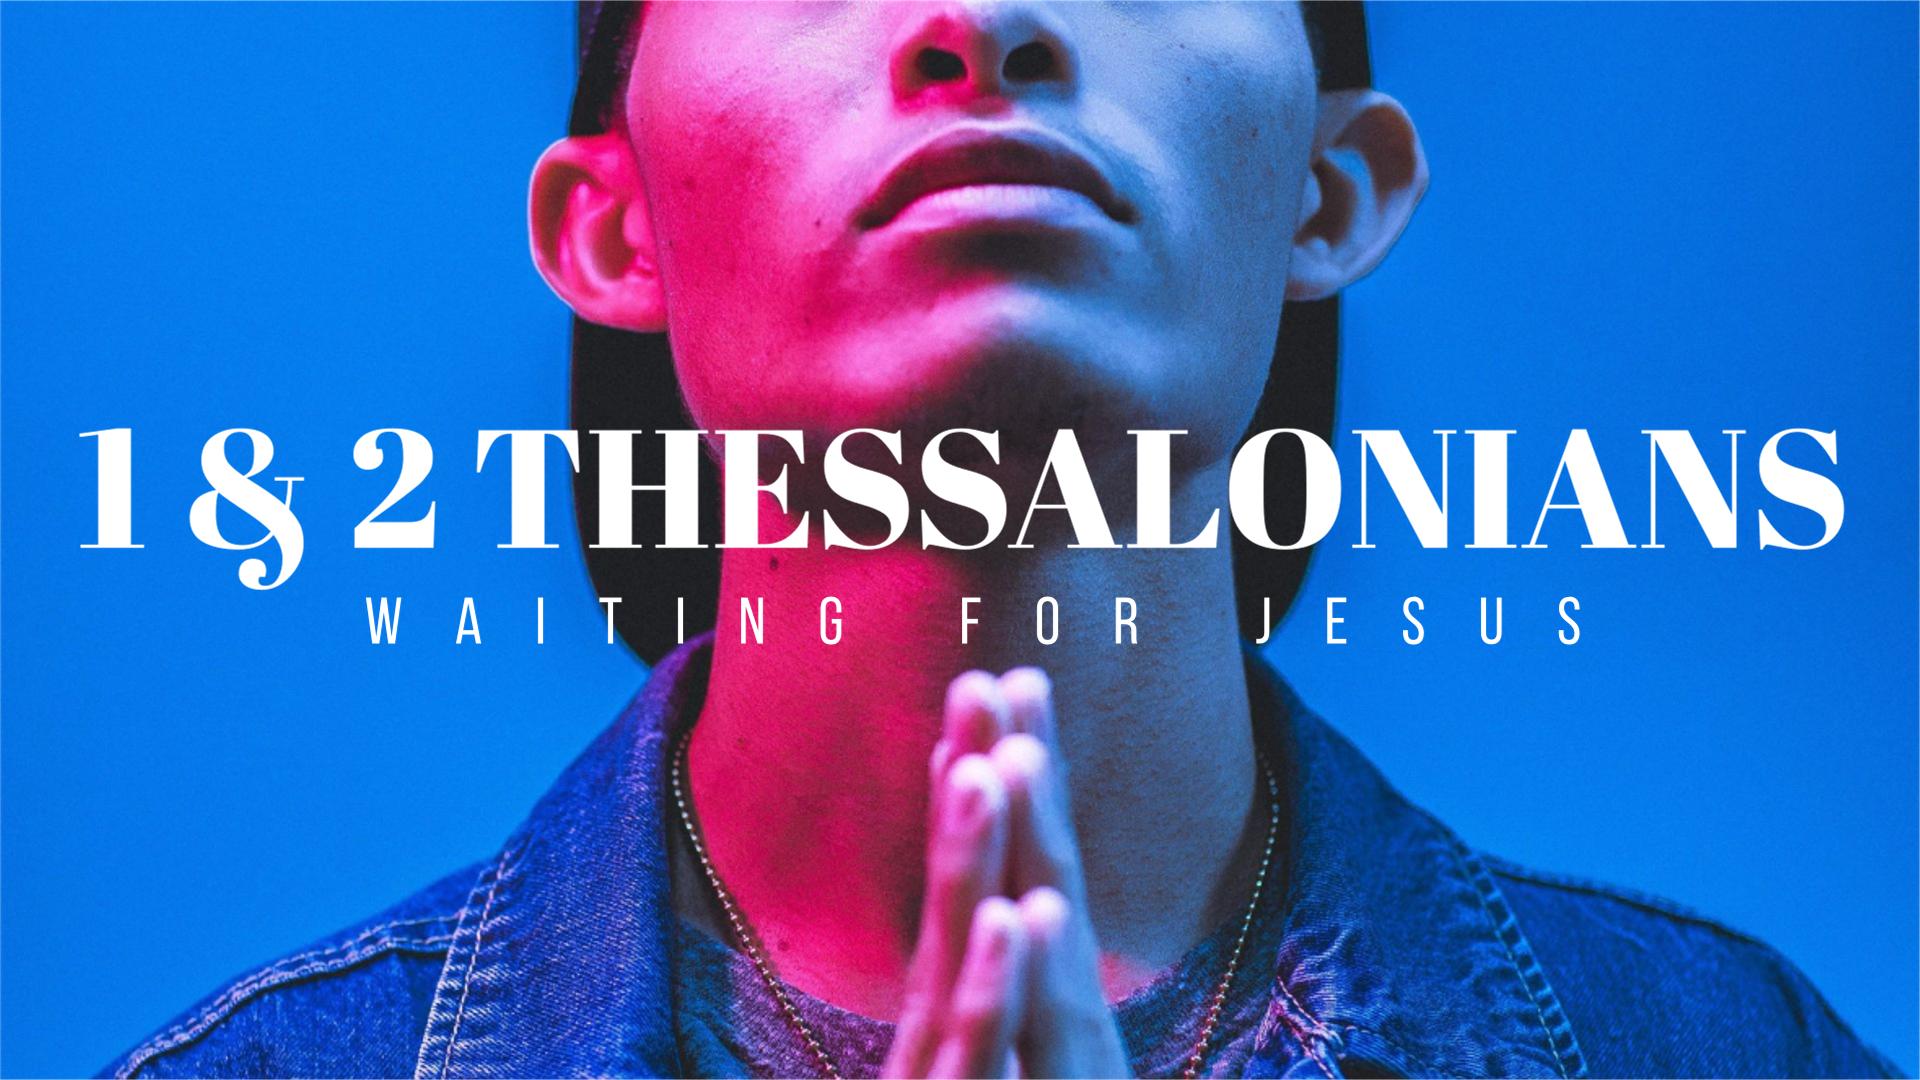 I Thessalonians 4:13-18 Comfort of His Coming (Waiting For Jesus) Image